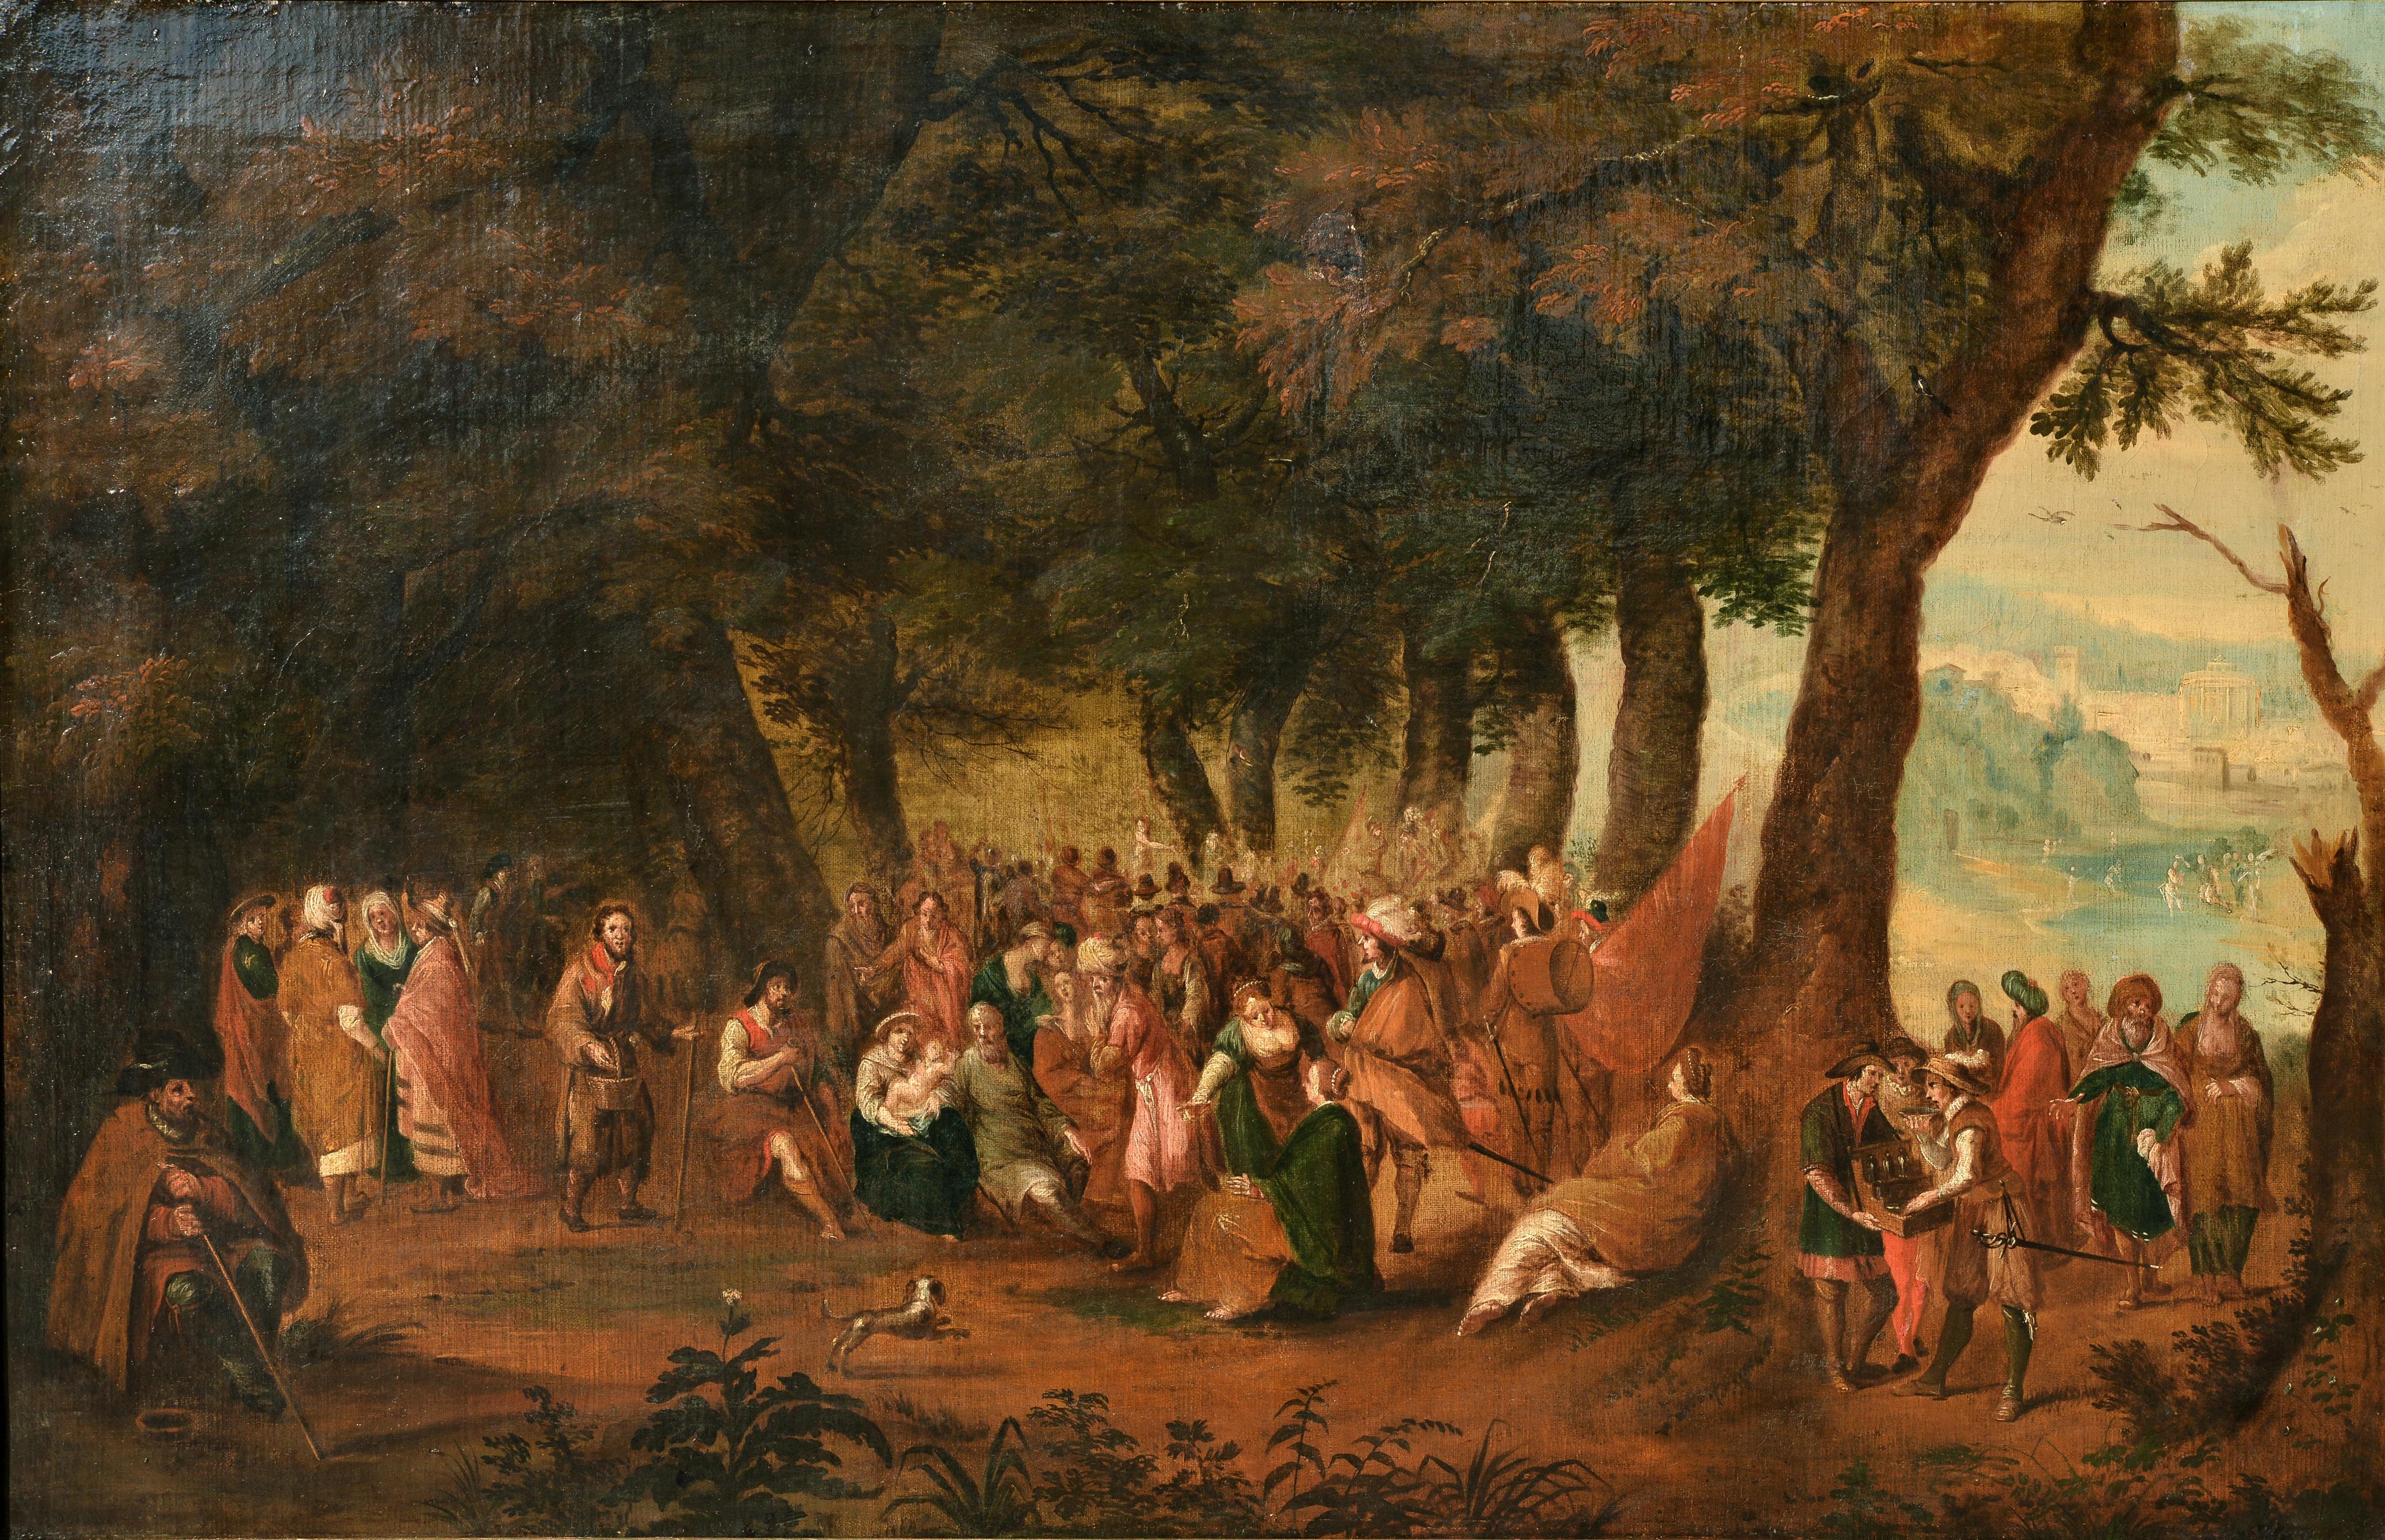 St. John's Day Fest Crowded Scene 17th century Flemish school Large Oil painting